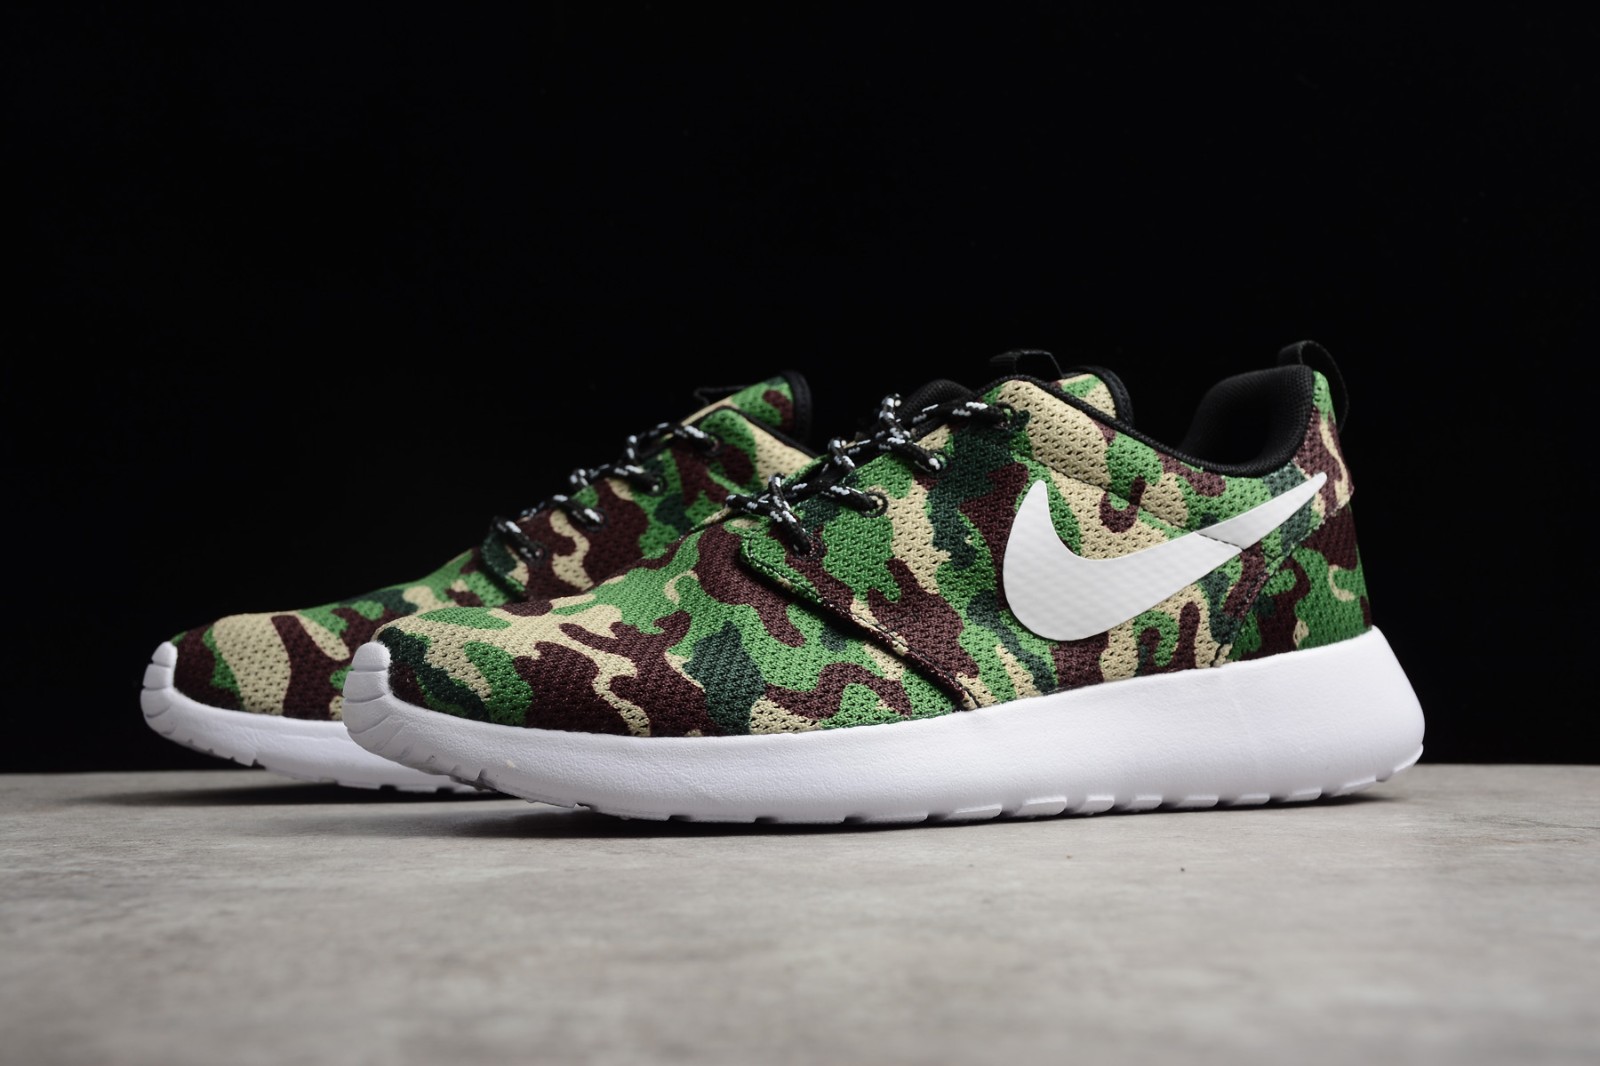 Nike Roshe Run ID Camo Green Running Shoes 943711 885 - share a subtle update on the trail-running favourite the XA Pro 1 -